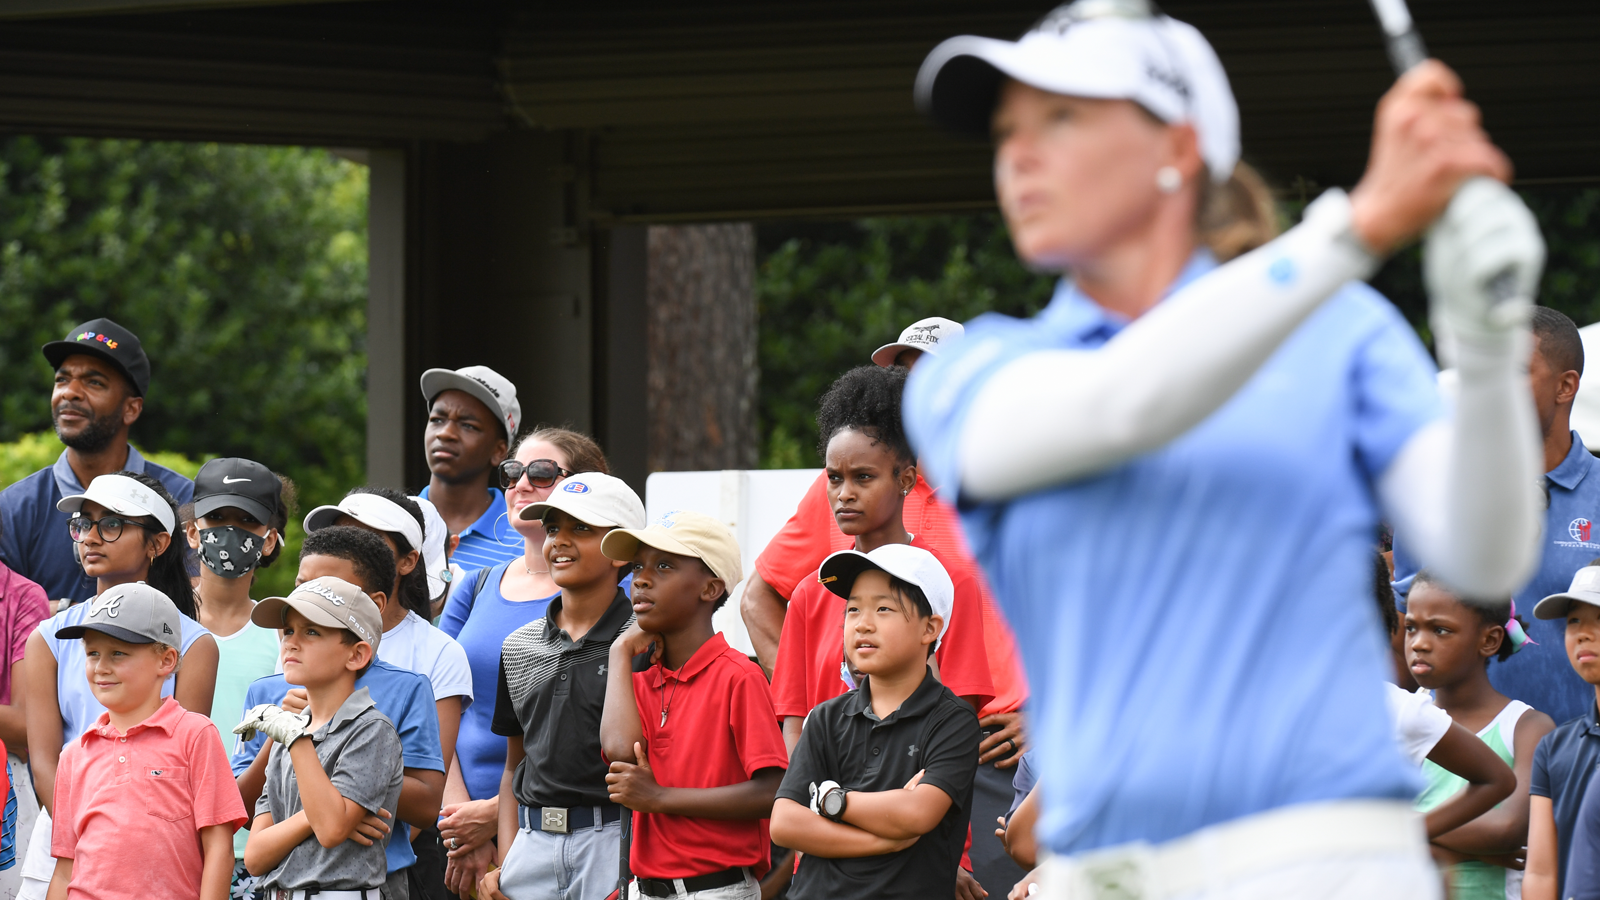 PGA of America Diversity, Equity and Inclusion photo